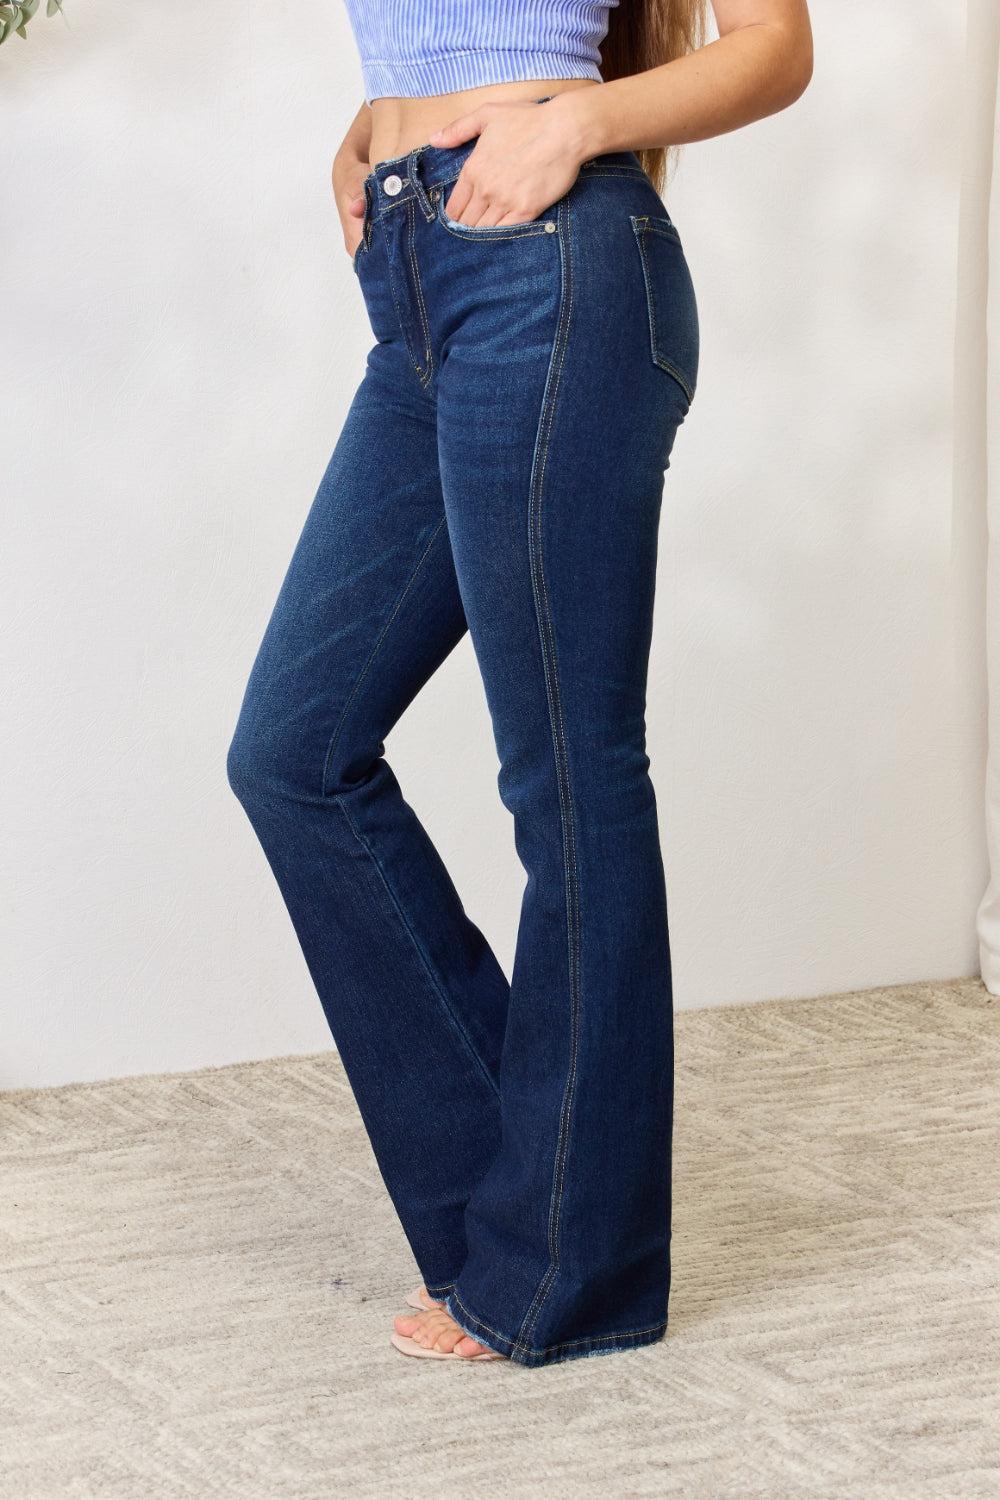 a woman wearing a blue top and jeans